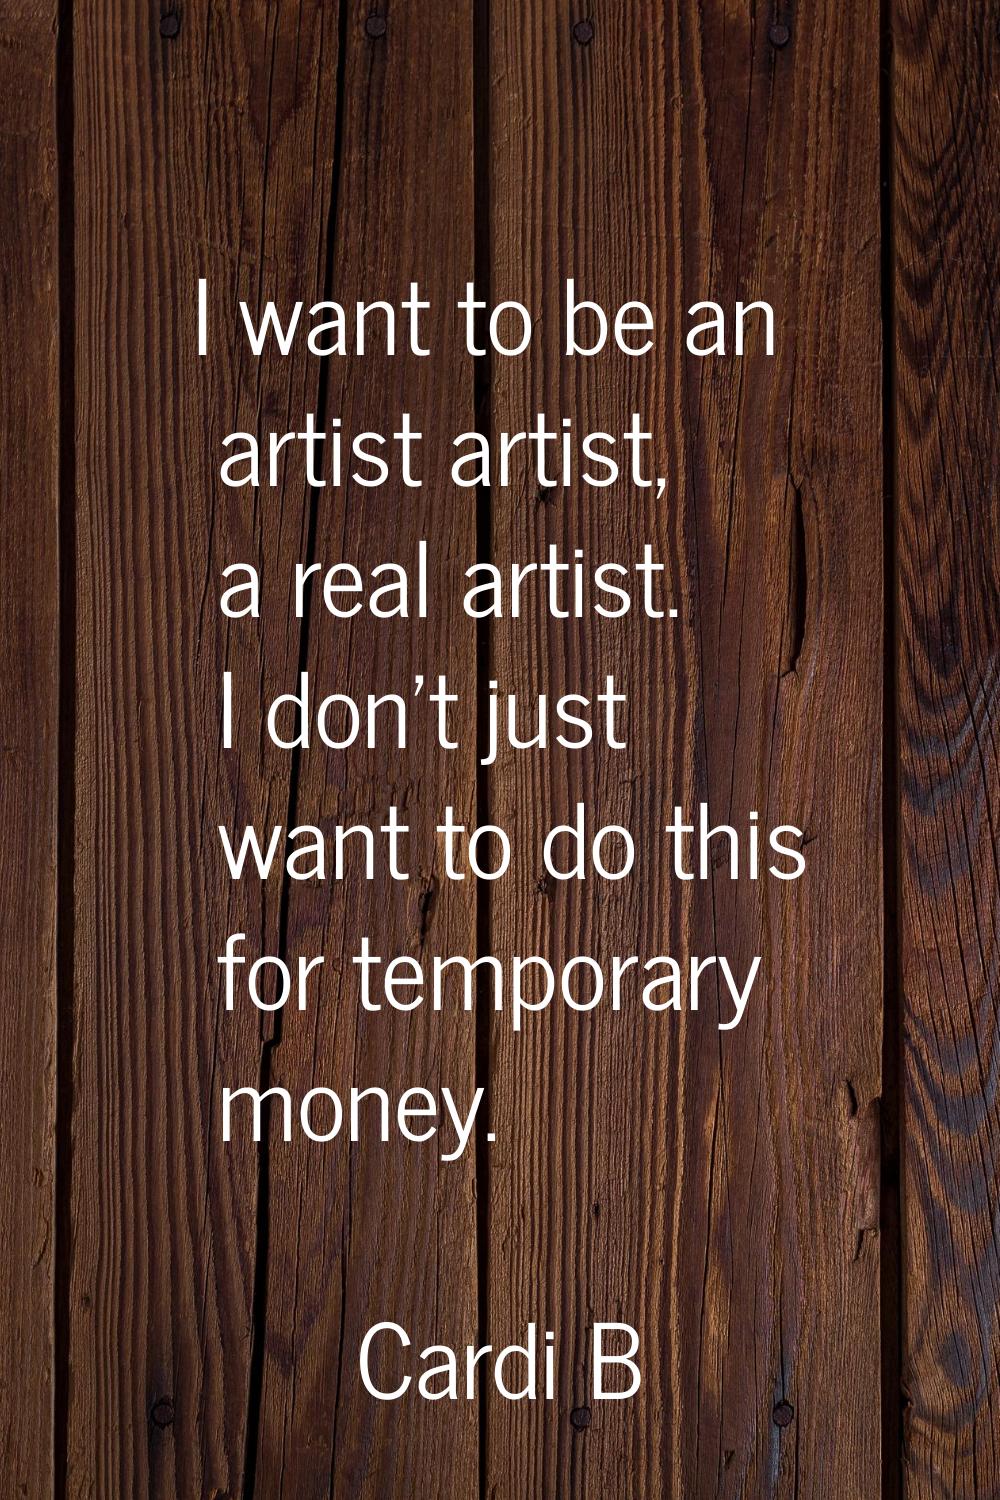 I want to be an artist artist, a real artist. I don't just want to do this for temporary money.